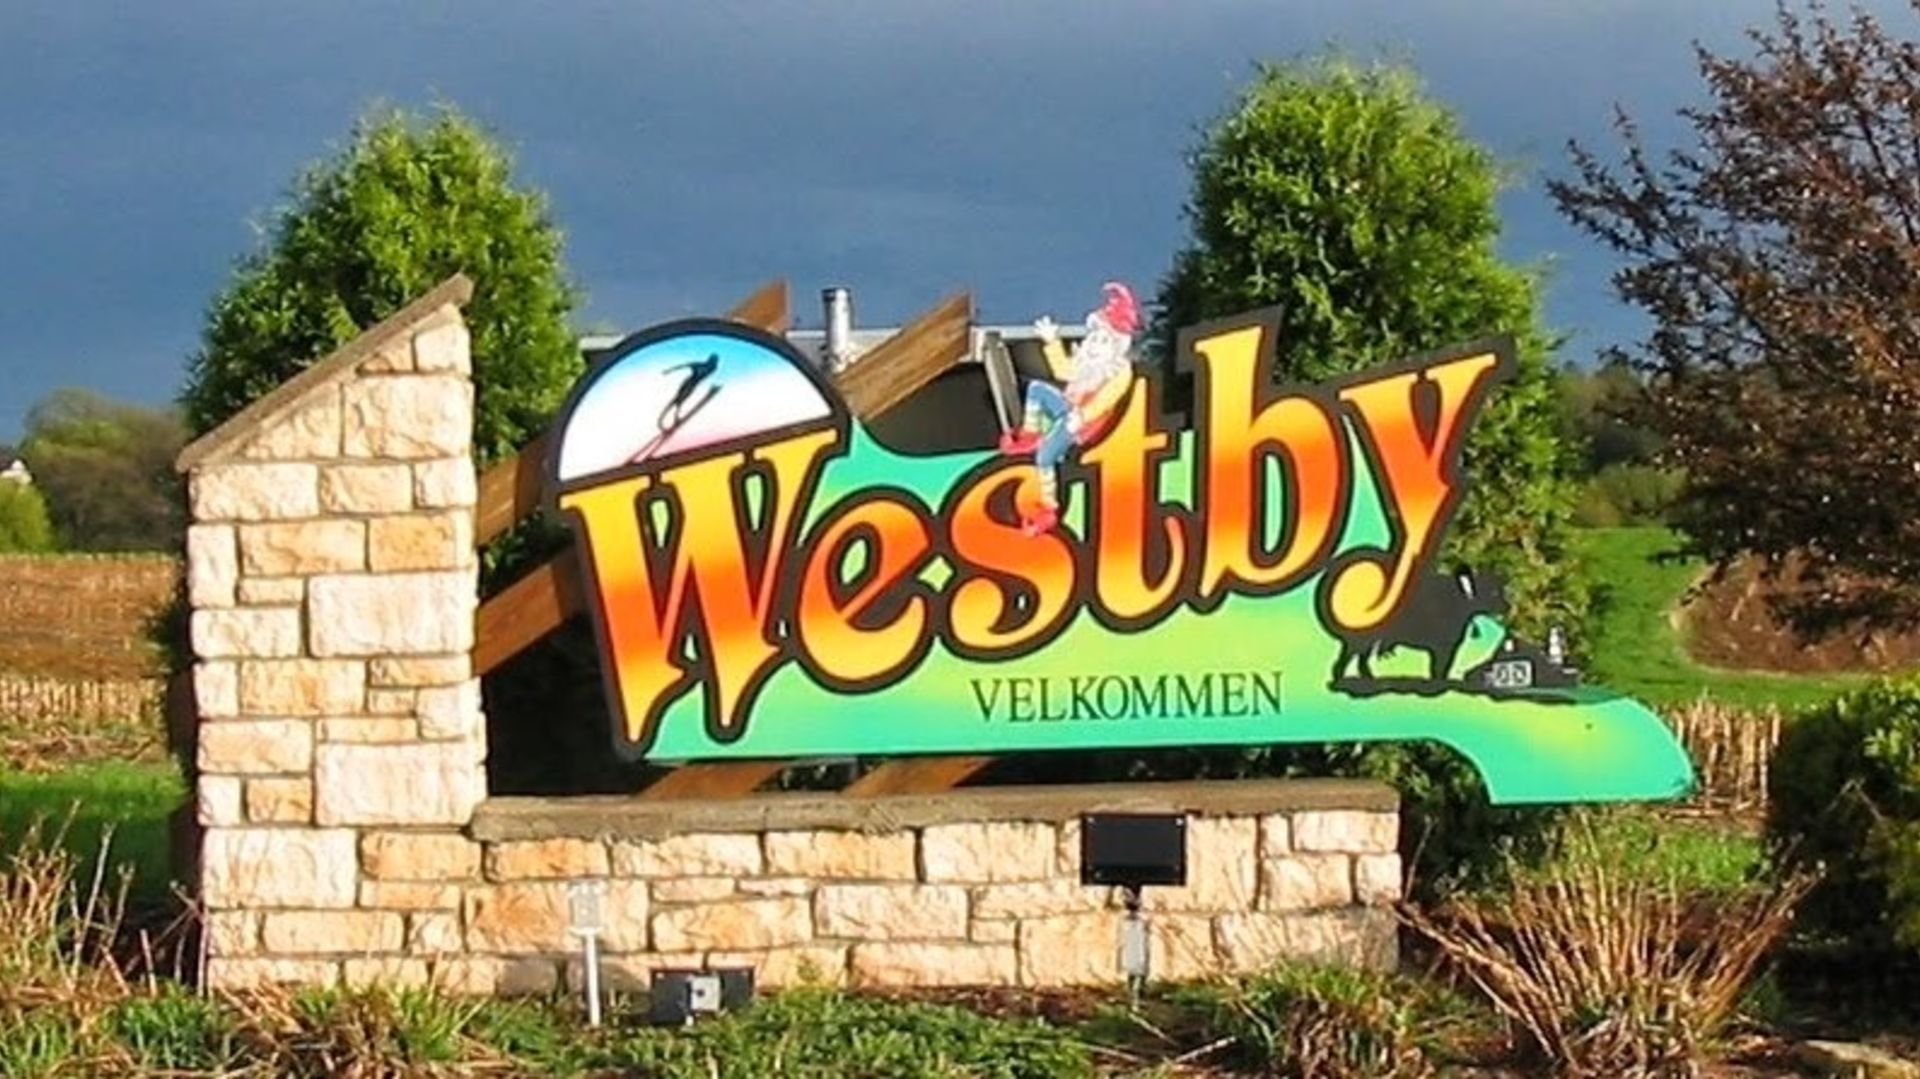 Westby